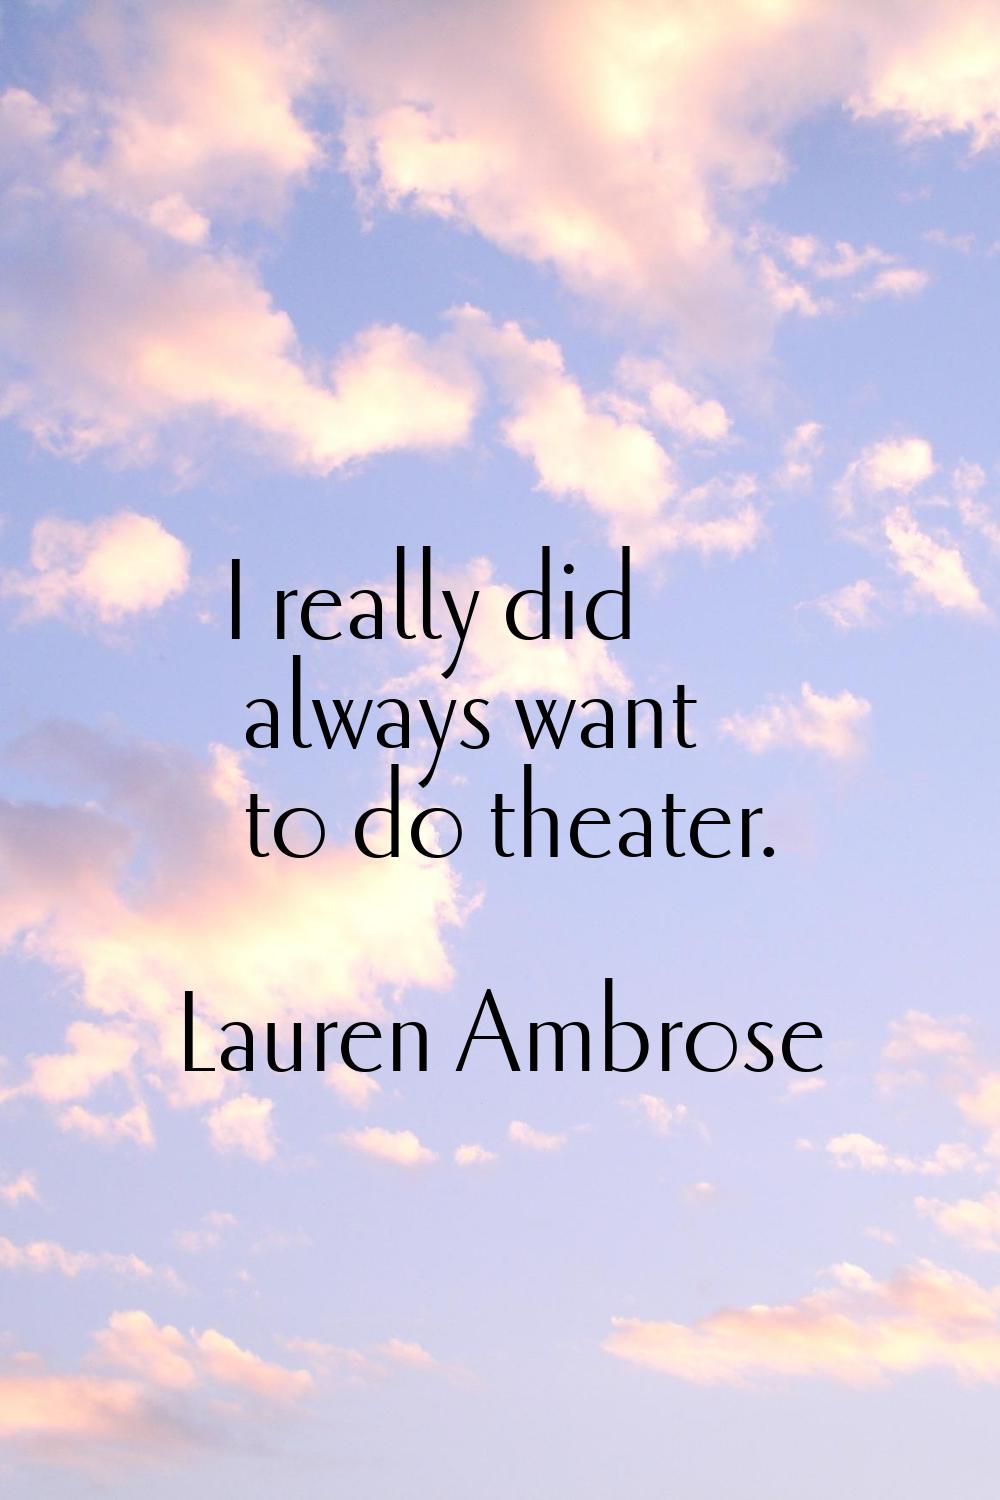 I really did always want to do theater.